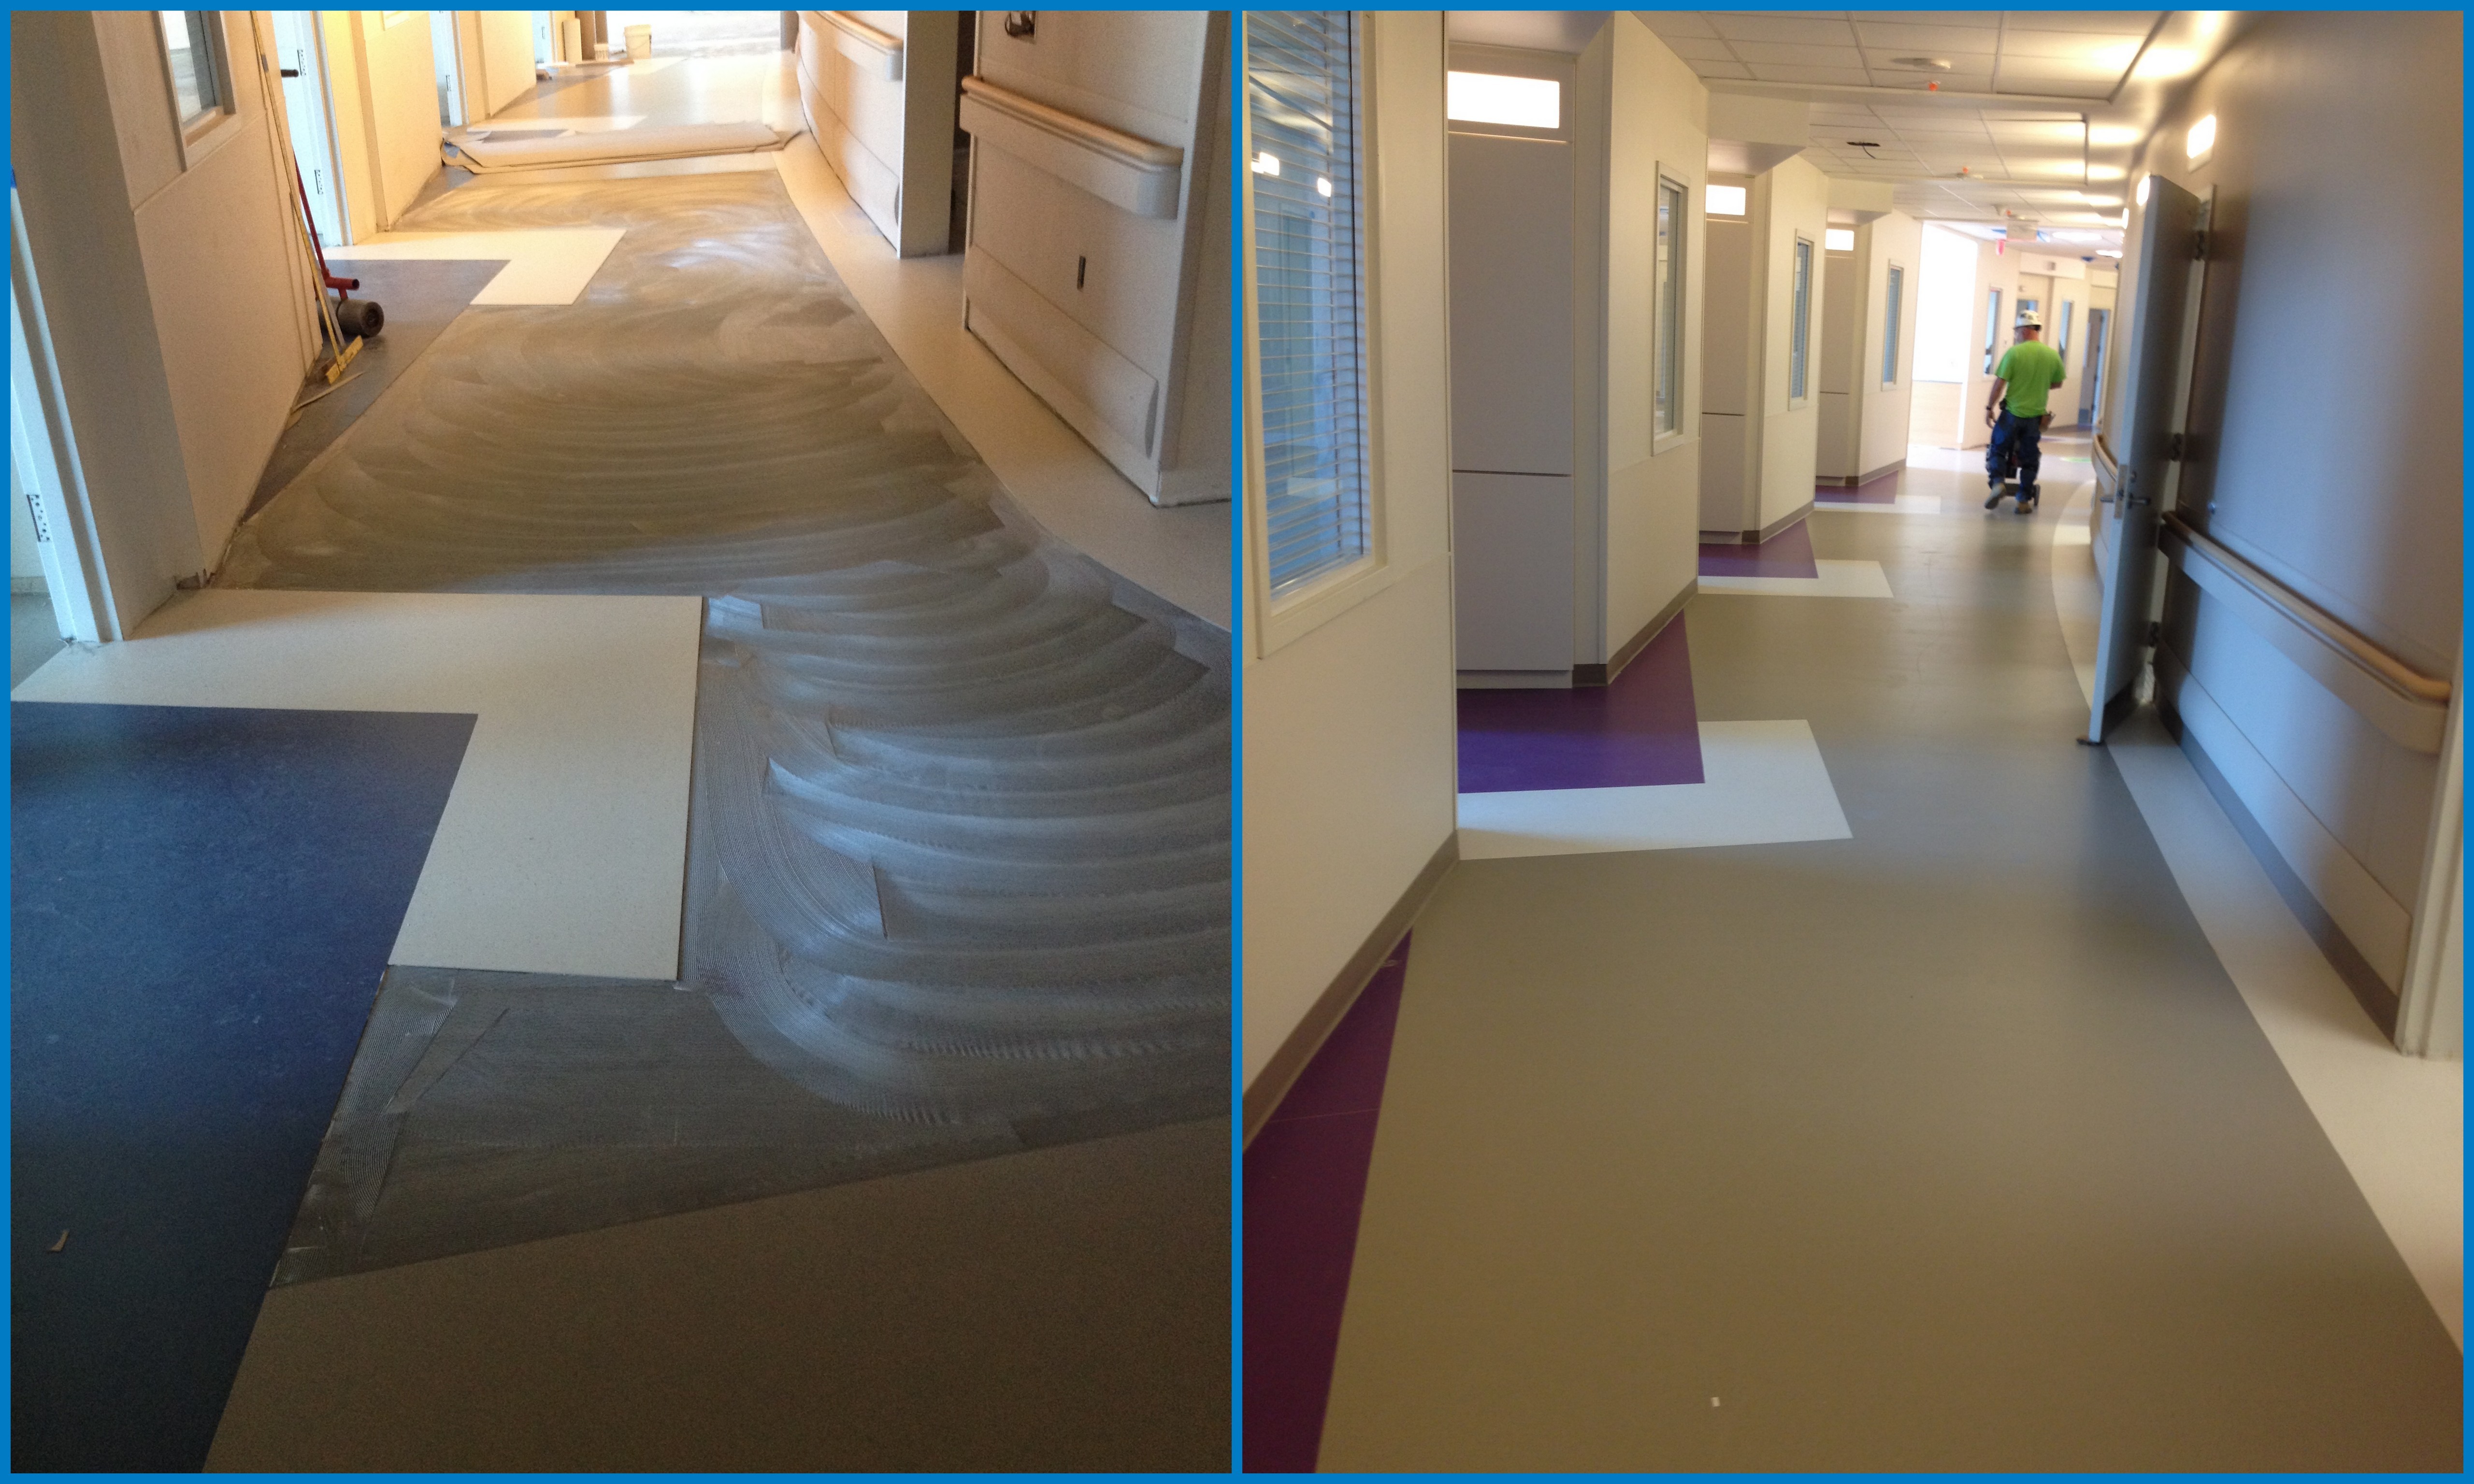 Alfred I. duPont Hospital for Children in Wilmington, DE, with flooring prepped with PENETRON Specialty Products.